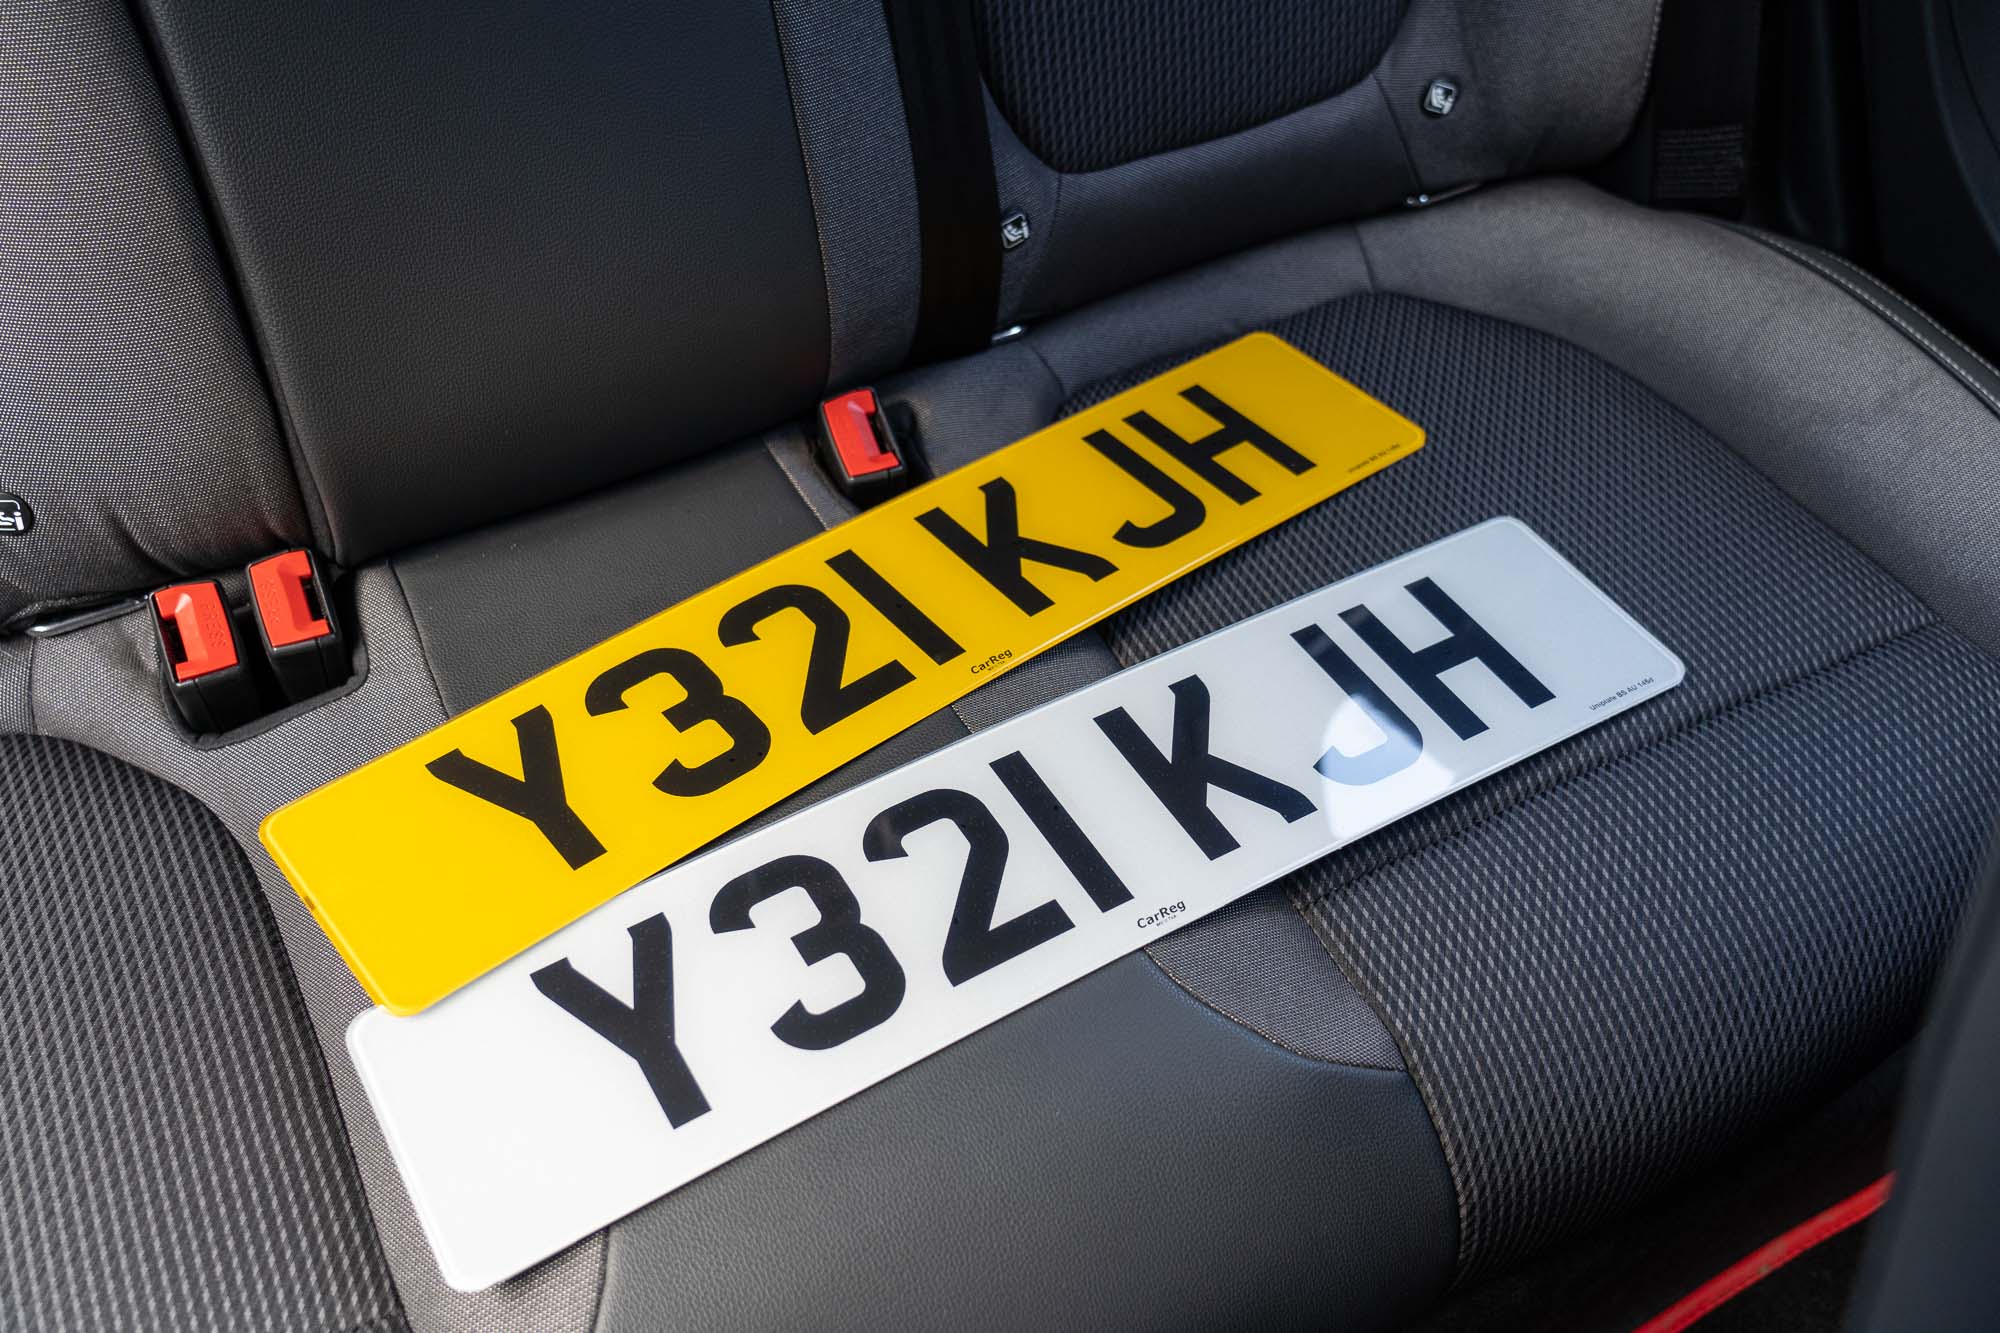 assigning a private number plate to a new car